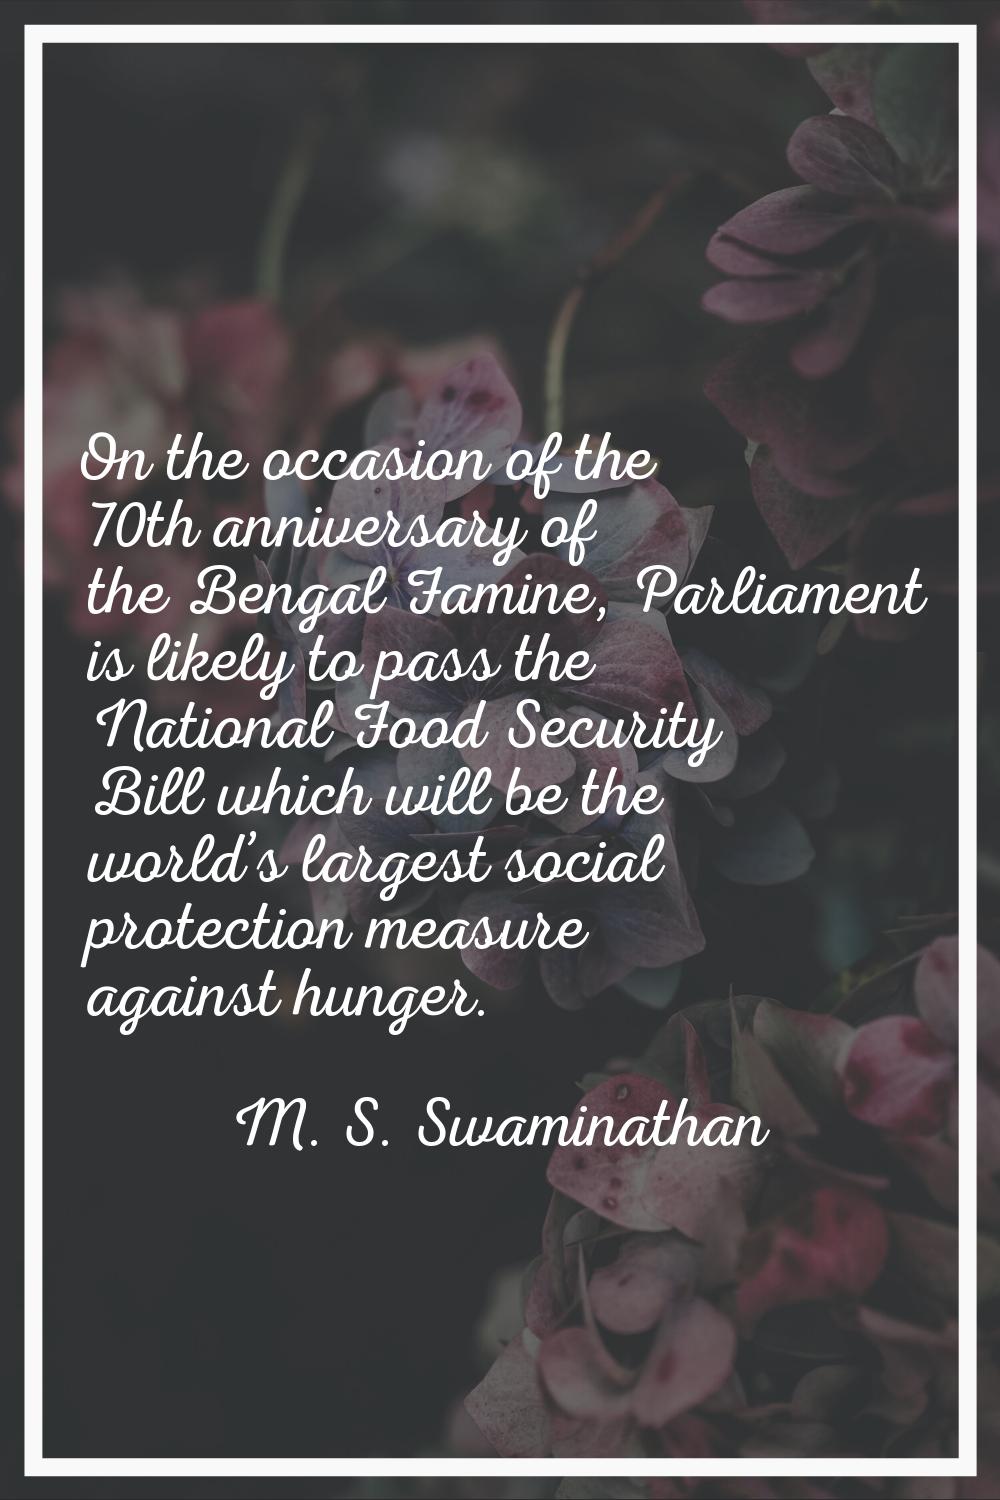 On the occasion of the 70th anniversary of the Bengal Famine, Parliament is likely to pass the Nati